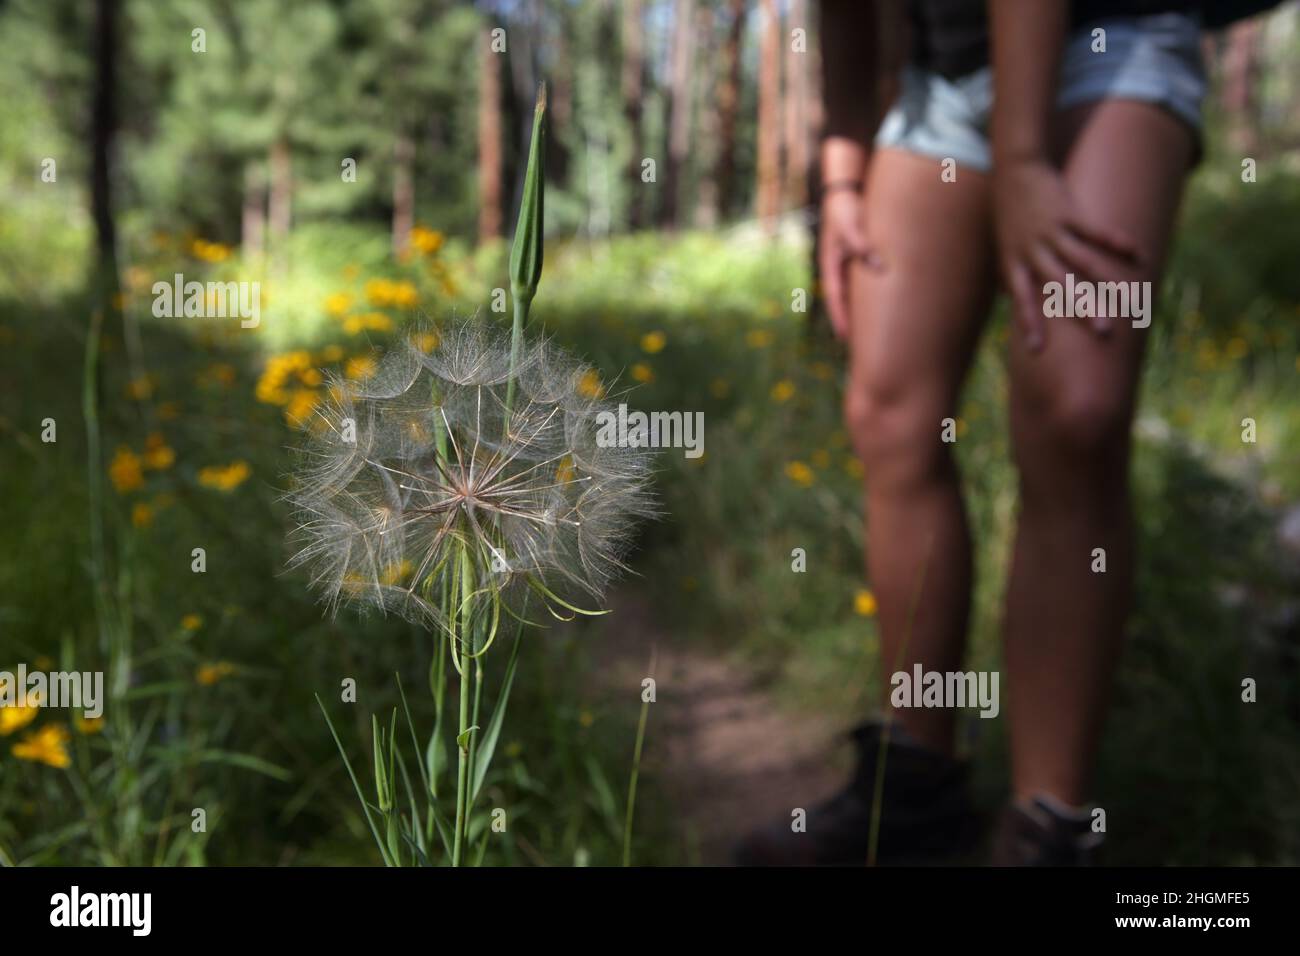 A female hiker walking along the North Rim Widforss Point hiking trail to the Grand Canyon stops to look at a dandelion seedhead Stock Photo